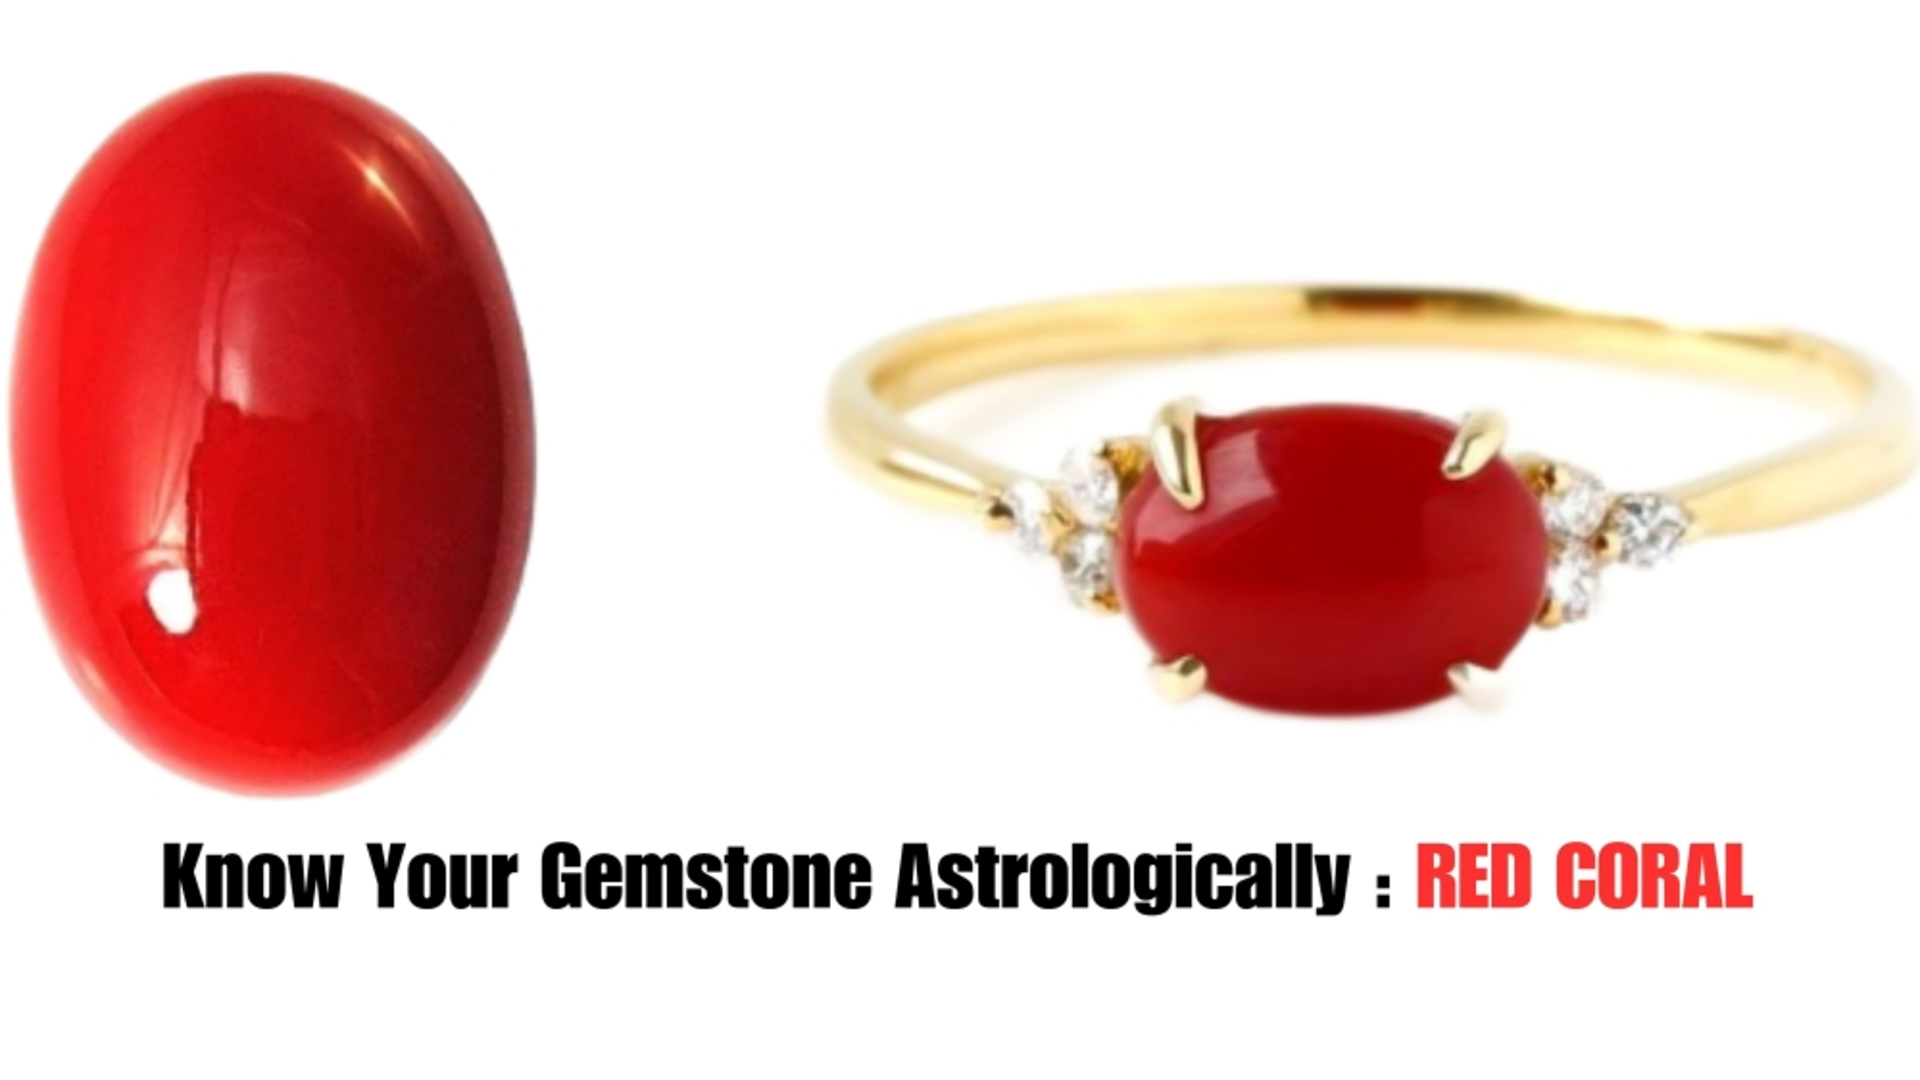 Know-Your-Gemstone-Astrologically-RED-CORAL.